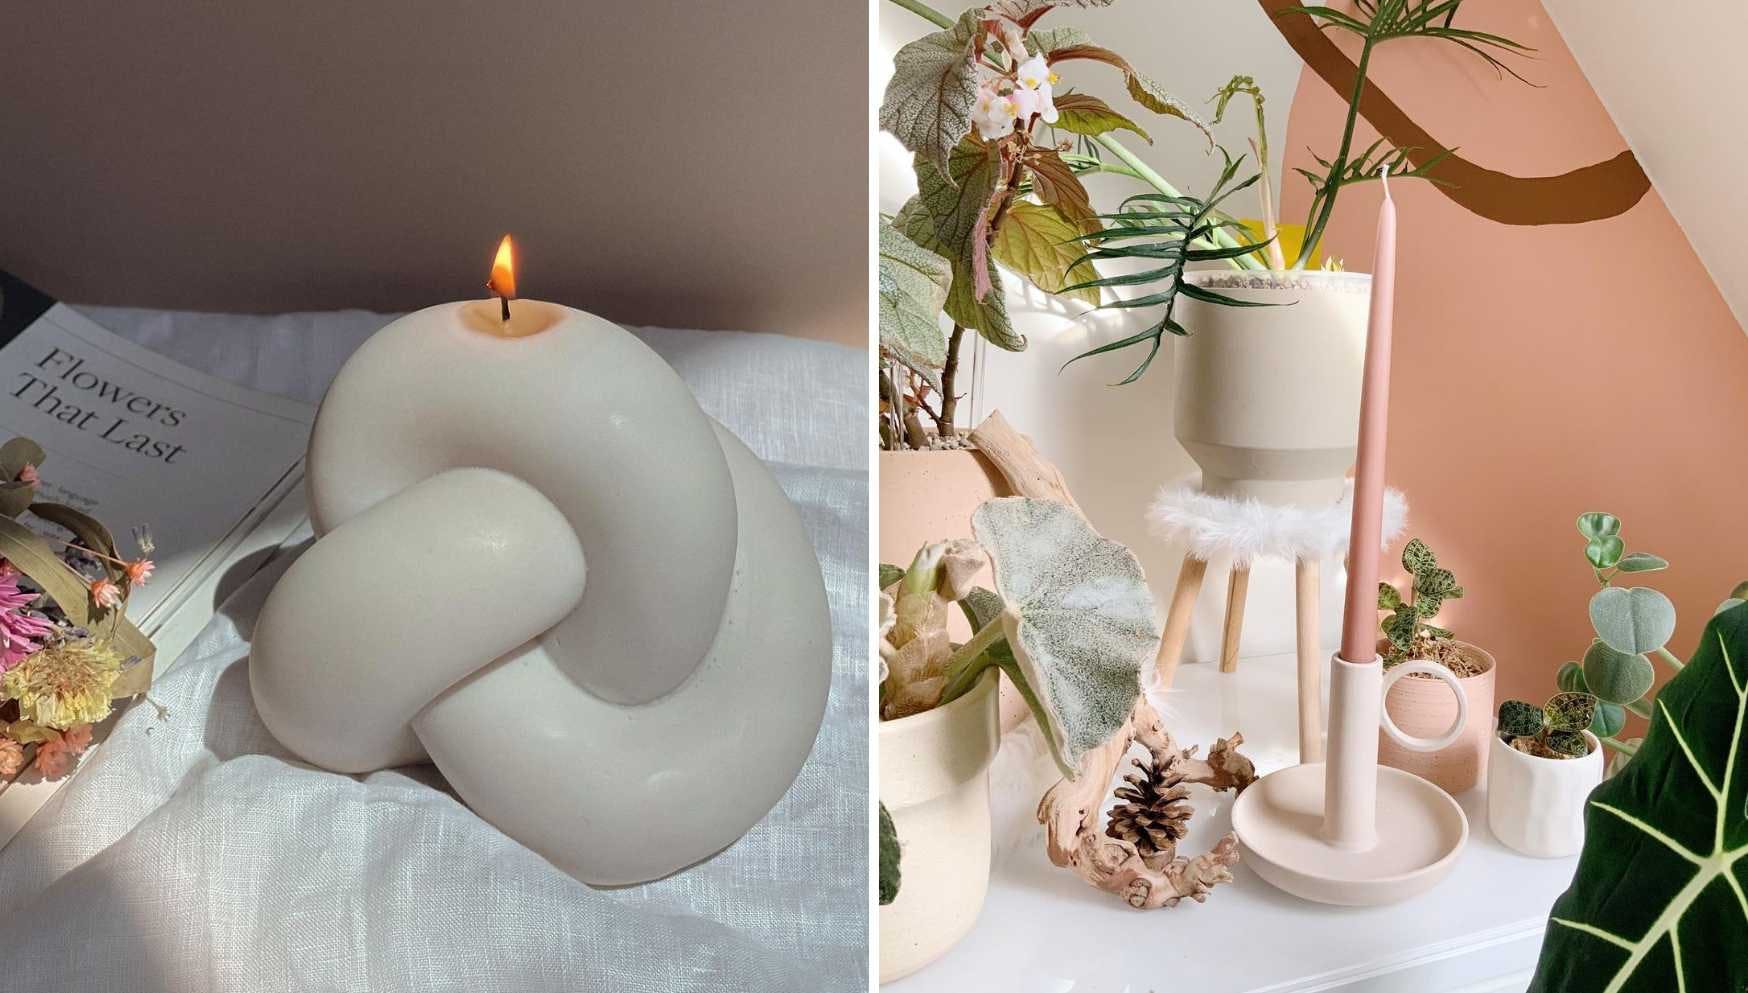 Decorate your home with candles | PLNTS.com